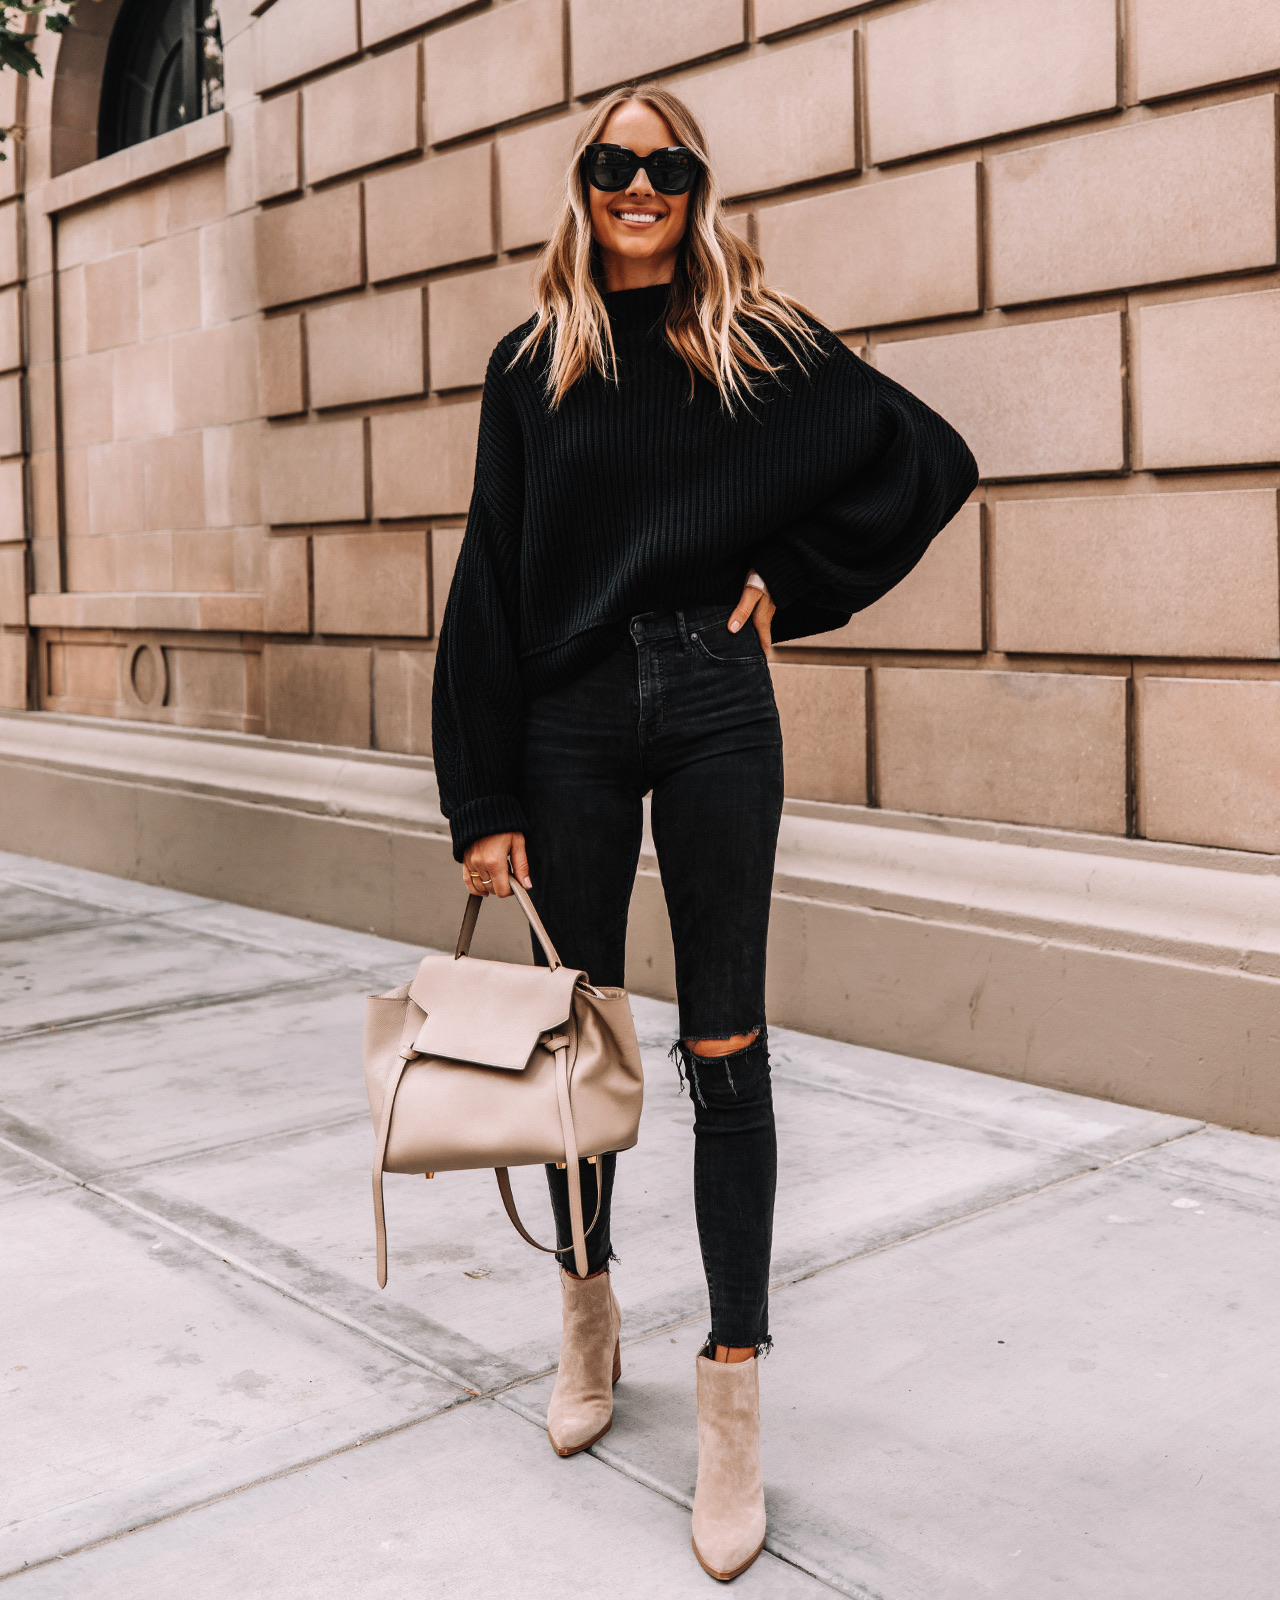 The Top 10 Fall Clothing Essentials All Women Need - Fashion Jackson